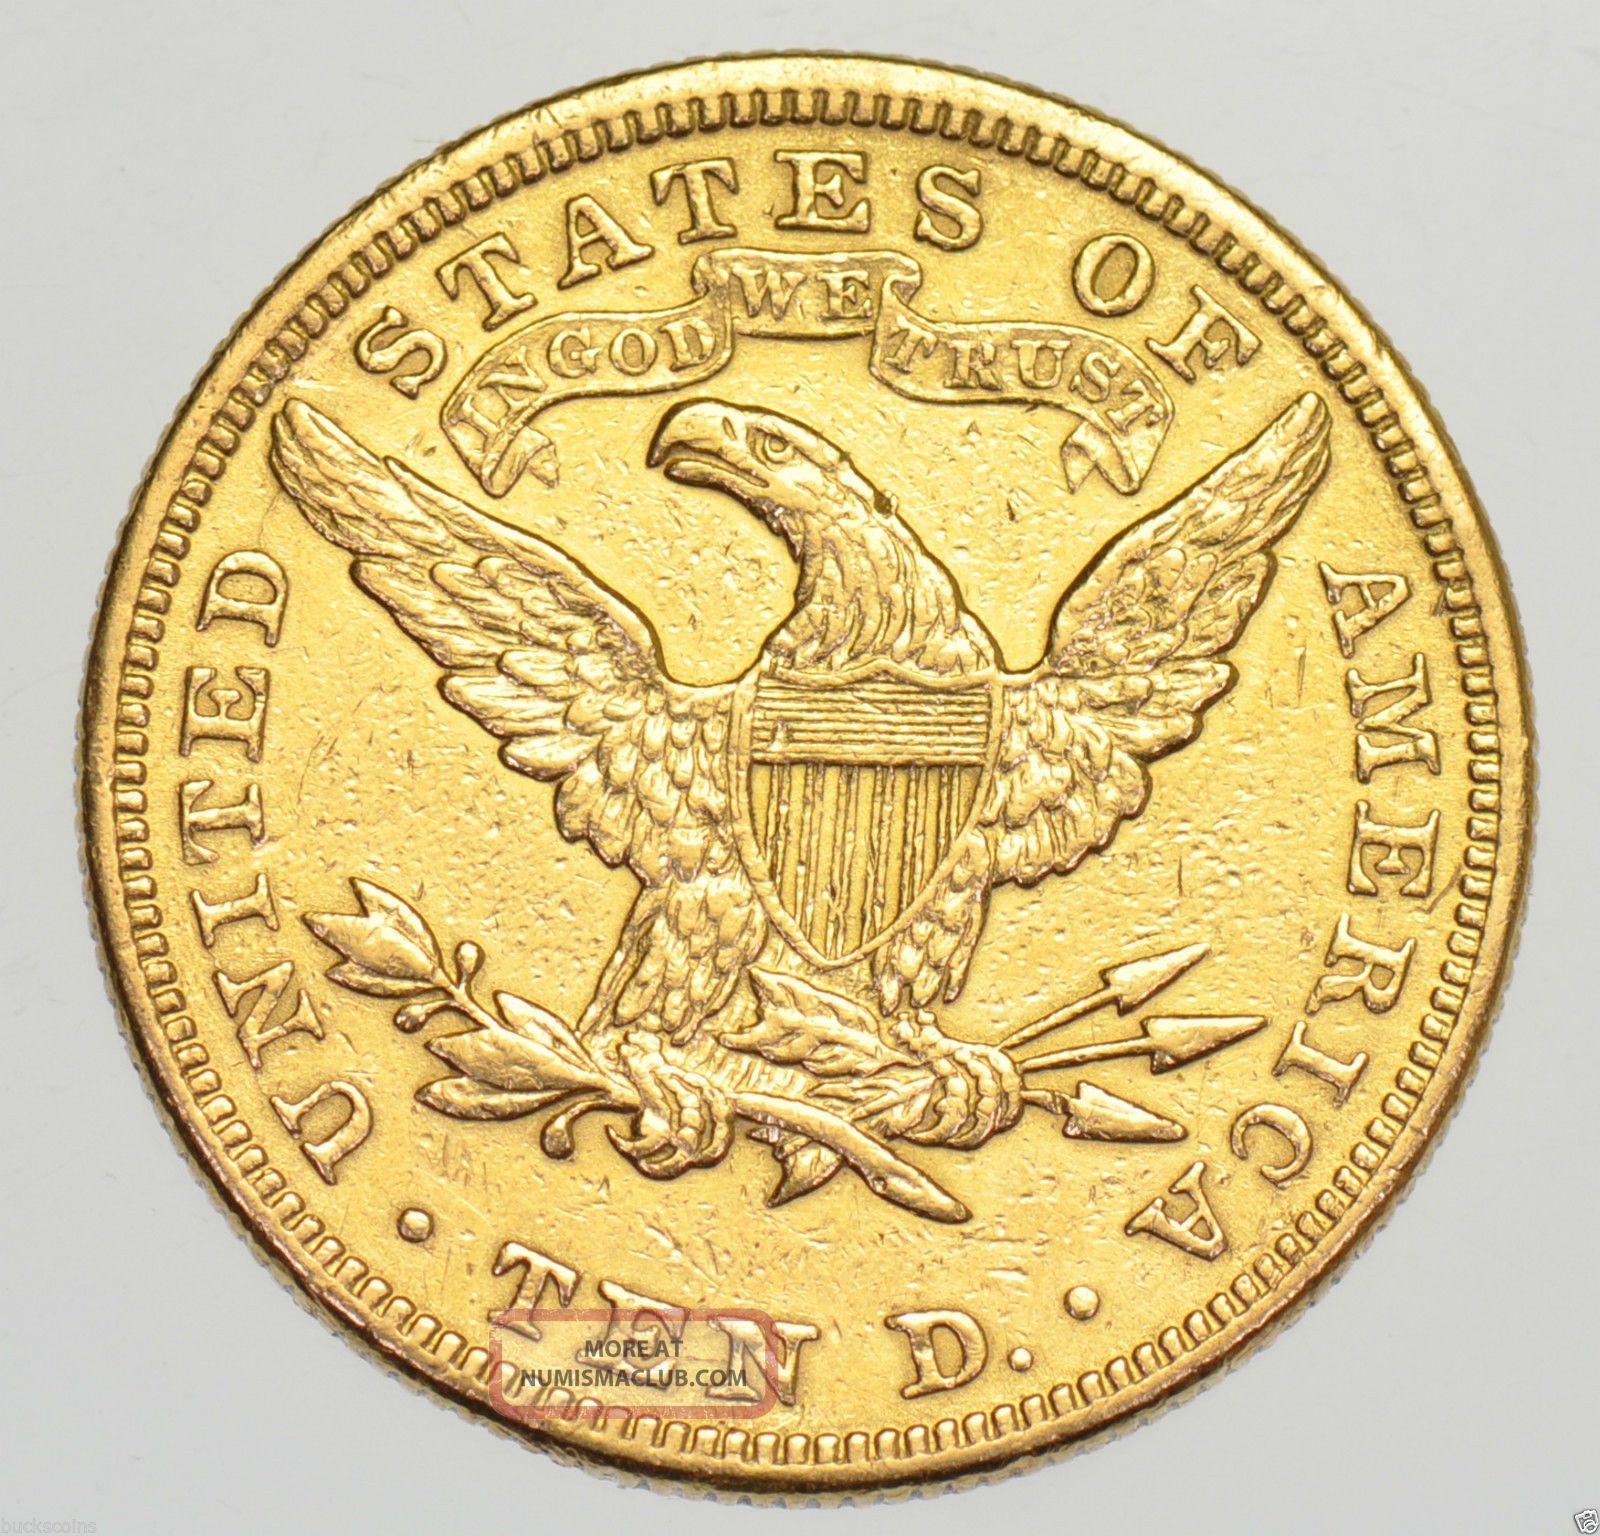 Usa, United States, Ten Dollars $10, Liberty Head 1898 Gold Coin